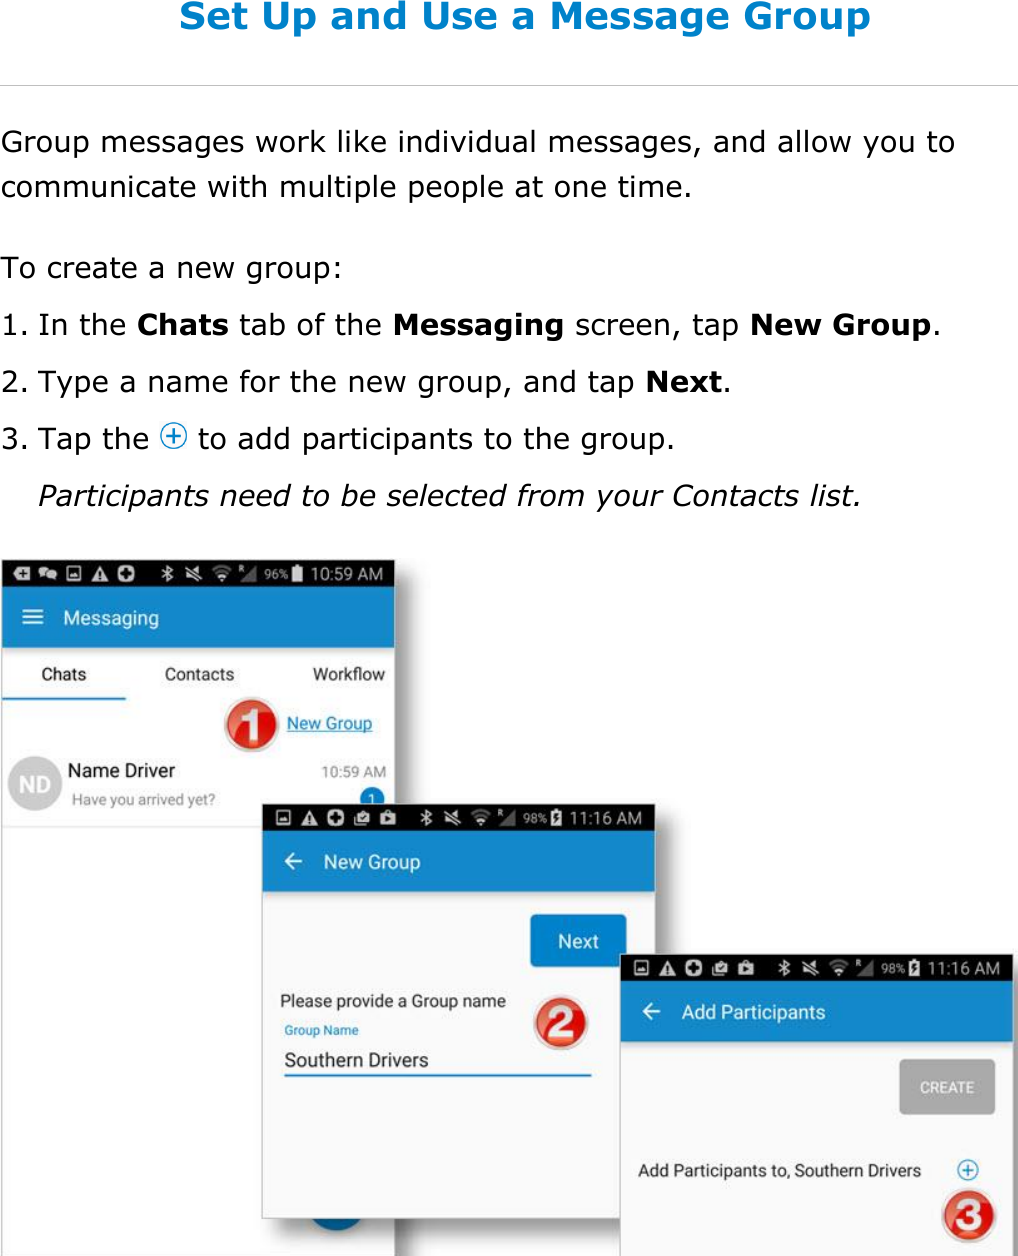 Send Messages, Forms, and Workflows DriverConnect User Guide  72 © 2017, Rand McNally, Inc. Set Up and Use a Message Group Group messages work like individual messages, and allow you to communicate with multiple people at one time. To create a new group: 1. In the Chats tab of the Messaging screen, tap New Group. 2. Type a name for the new group, and tap Next. 3. Tap the   to add participants to the group. Participants need to be selected from your Contacts list.    